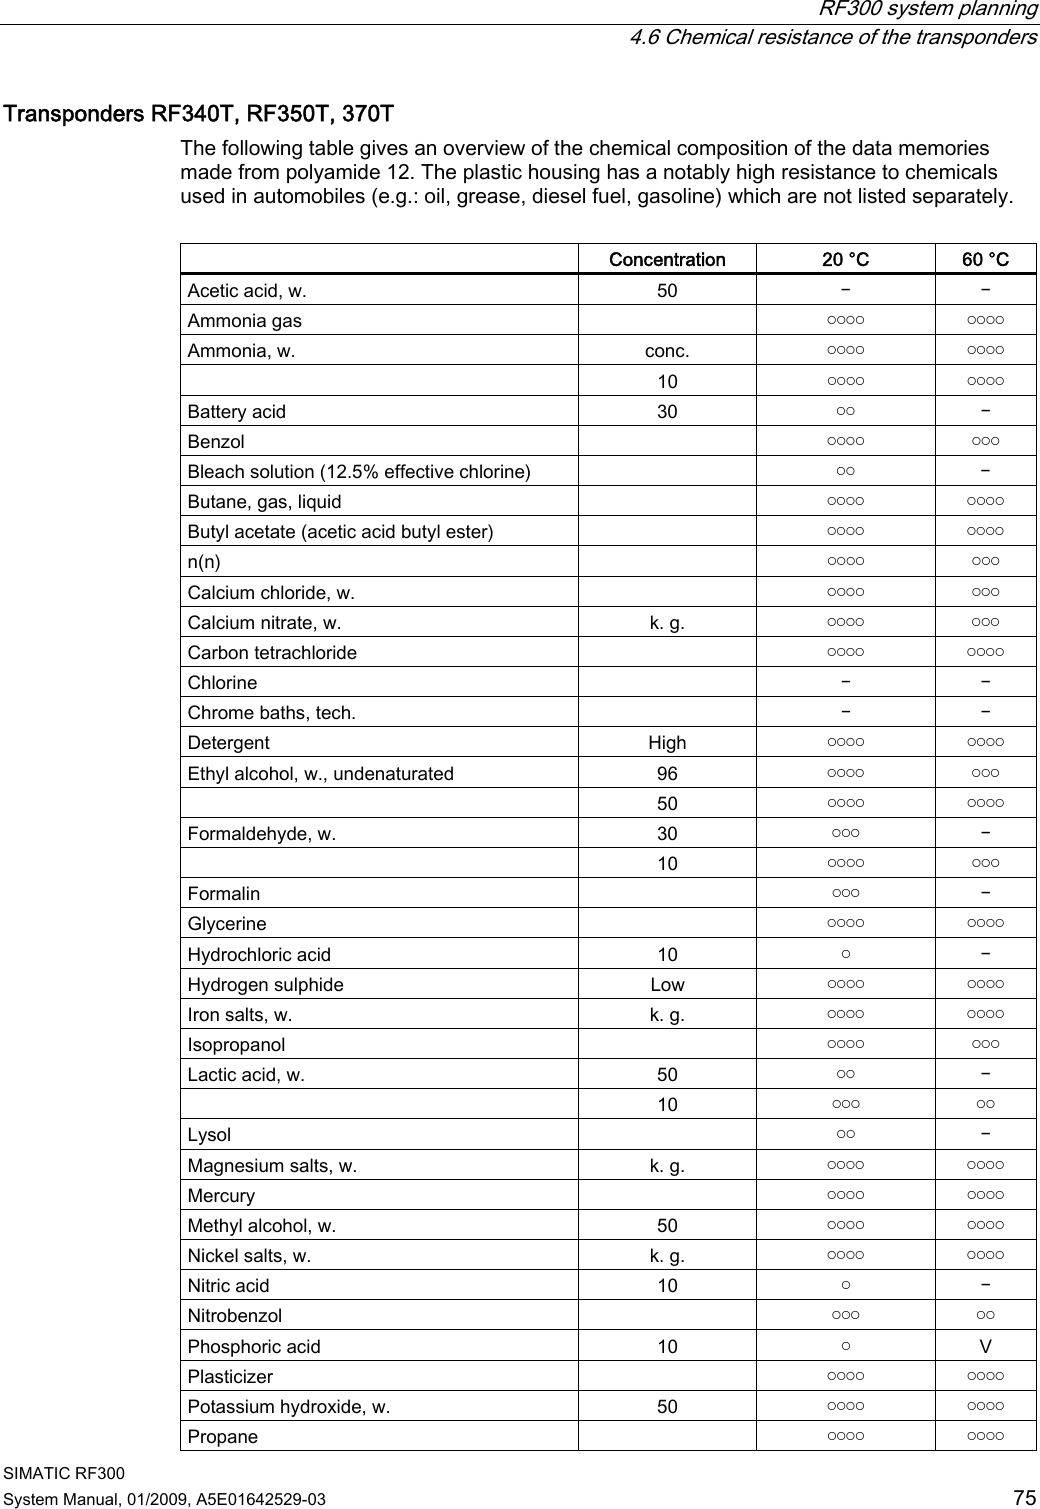  RF300 system planning   4.6 Chemical resistance of the transponders SIMATIC RF300 System Manual, 01/2009, A5E01642529-03  75 Transponders RF340T, RF350T, 370T The following table gives an overview of the chemical composition of the data memories made from polyamide 12. The plastic housing has a notably high resistance to chemicals used in automobiles (e.g.: oil, grease, diesel fuel, gasoline) which are not listed separately.    Concentration  20 °C  60 °C Acetic acid, w.  50  ￚ  ￚ Ammonia gas    ￮￮￮￮  ￮￮￮￮ Ammonia, w.  conc.  ￮￮￮￮  ￮￮￮￮   10  ￮￮￮￮  ￮￮￮￮ Battery acid  30  ￮￮  ￚ Benzol    ￮￮￮￮  ￮￮￮ Bleach solution (12.5% effective chlorine)    ￮￮  ￚ Butane, gas, liquid    ￮￮￮￮  ￮￮￮￮ Butyl acetate (acetic acid butyl ester)    ￮￮￮￮  ￮￮￮￮ n(n)    ￮￮￮￮  ￮￮￮ Calcium chloride, w.    ￮￮￮￮  ￮￮￮ Calcium nitrate, w.  k. g.  ￮￮￮￮  ￮￮￮ Carbon tetrachloride    ￮￮￮￮  ￮￮￮￮ Chlorine    ￚ  ￚ Chrome baths, tech.    ￚ  ￚ Detergent  High  ￮￮￮￮  ￮￮￮￮ Ethyl alcohol, w., undenaturated  96  ￮￮￮￮  ￮￮￮   50  ￮￮￮￮  ￮￮￮￮ Formaldehyde, w.  30  ￮￮￮  ￚ   10  ￮￮￮￮  ￮￮￮ Formalin    ￮￮￮  ￚ Glycerine    ￮￮￮￮  ￮￮￮￮ Hydrochloric acid  10  ￮  ￚ Hydrogen sulphide  Low  ￮￮￮￮  ￮￮￮￮ Iron salts, w.  k. g.  ￮￮￮￮  ￮￮￮￮ Isopropanol    ￮￮￮￮  ￮￮￮ Lactic acid, w.  50  ￮￮  ￚ   10  ￮￮￮  ￮￮ Lysol    ￮￮  ￚ Magnesium salts, w.  k. g.  ￮￮￮￮  ￮￮￮￮ Mercury    ￮￮￮￮  ￮￮￮￮ Methyl alcohol, w.  50  ￮￮￮￮  ￮￮￮￮ Nickel salts, w.  k. g.  ￮￮￮￮  ￮￮￮￮ Nitric acid  10  ￮  ￚ Nitrobenzol    ￮￮￮  ￮￮ Phosphoric acid  10  ￮  V Plasticizer    ￮￮￮￮  ￮￮￮￮ Potassium hydroxide, w.  50  ￮￮￮￮  ￮￮￮￮ Propane    ￮￮￮￮  ￮￮￮￮ 